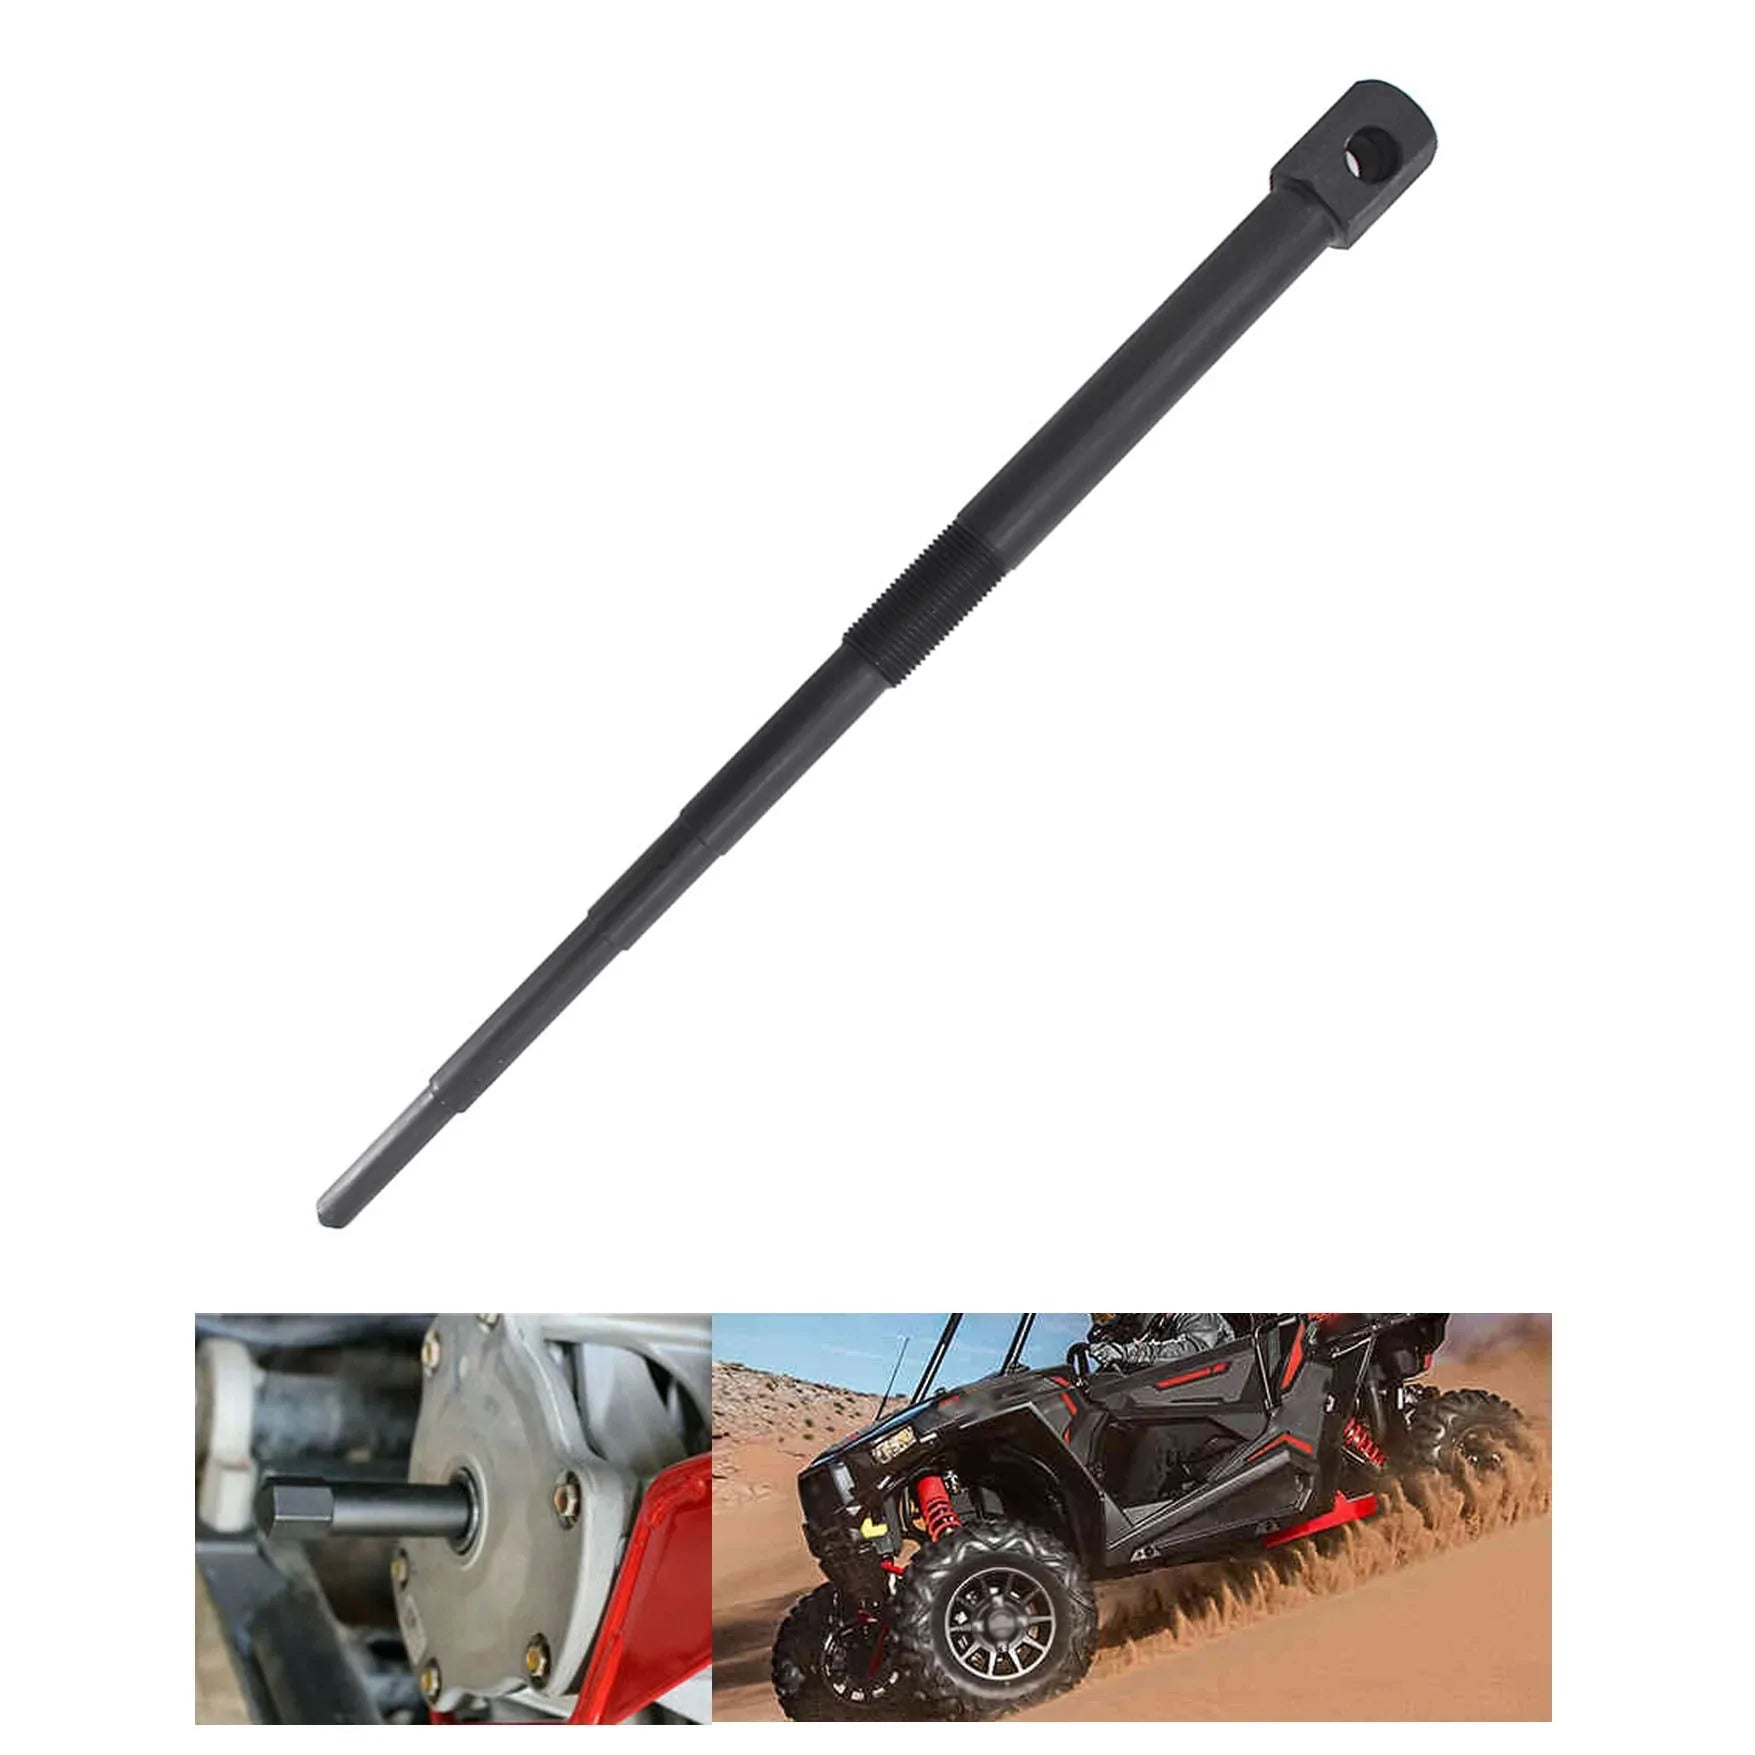 Primary Clutch Puller Tool Fits for POLARIS RZR 900 LE Trail EPS Pursuit XC Edition EPS 2872085 LAB WORK MOTO